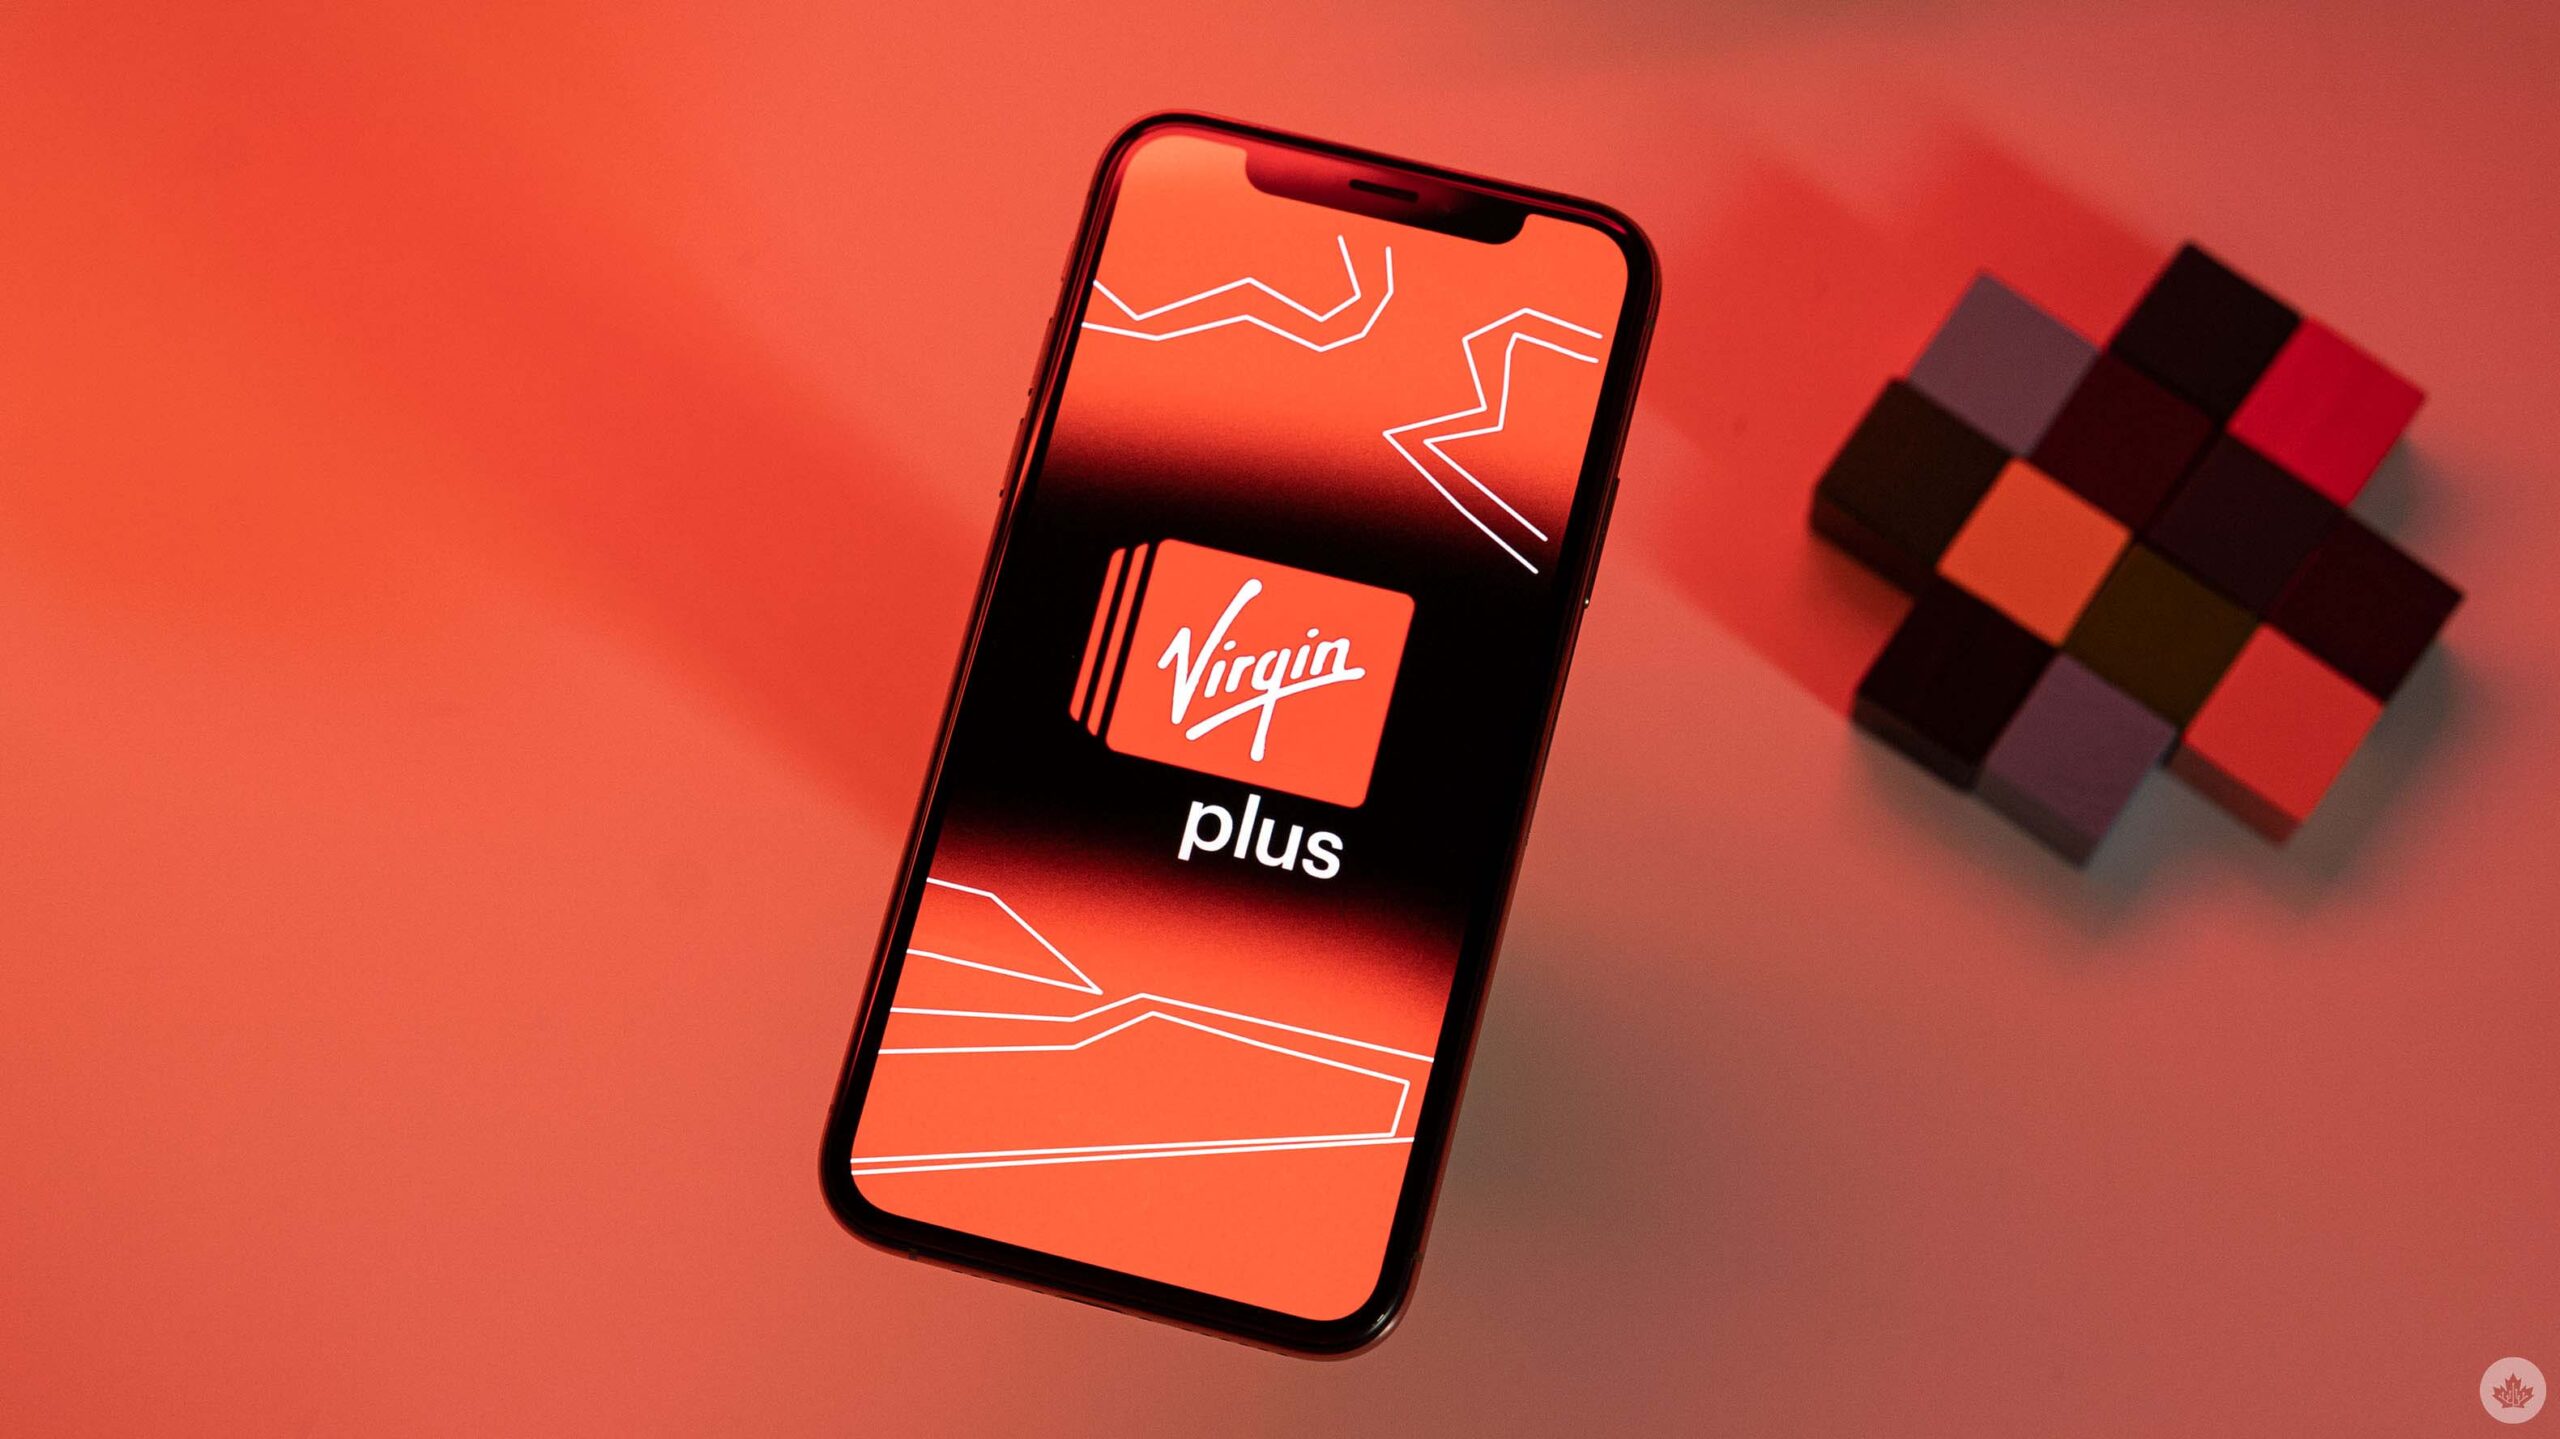 Virgin Plus Introduces Five-Year Fixed Price Guarantee for Internet Plans in Quebec 26